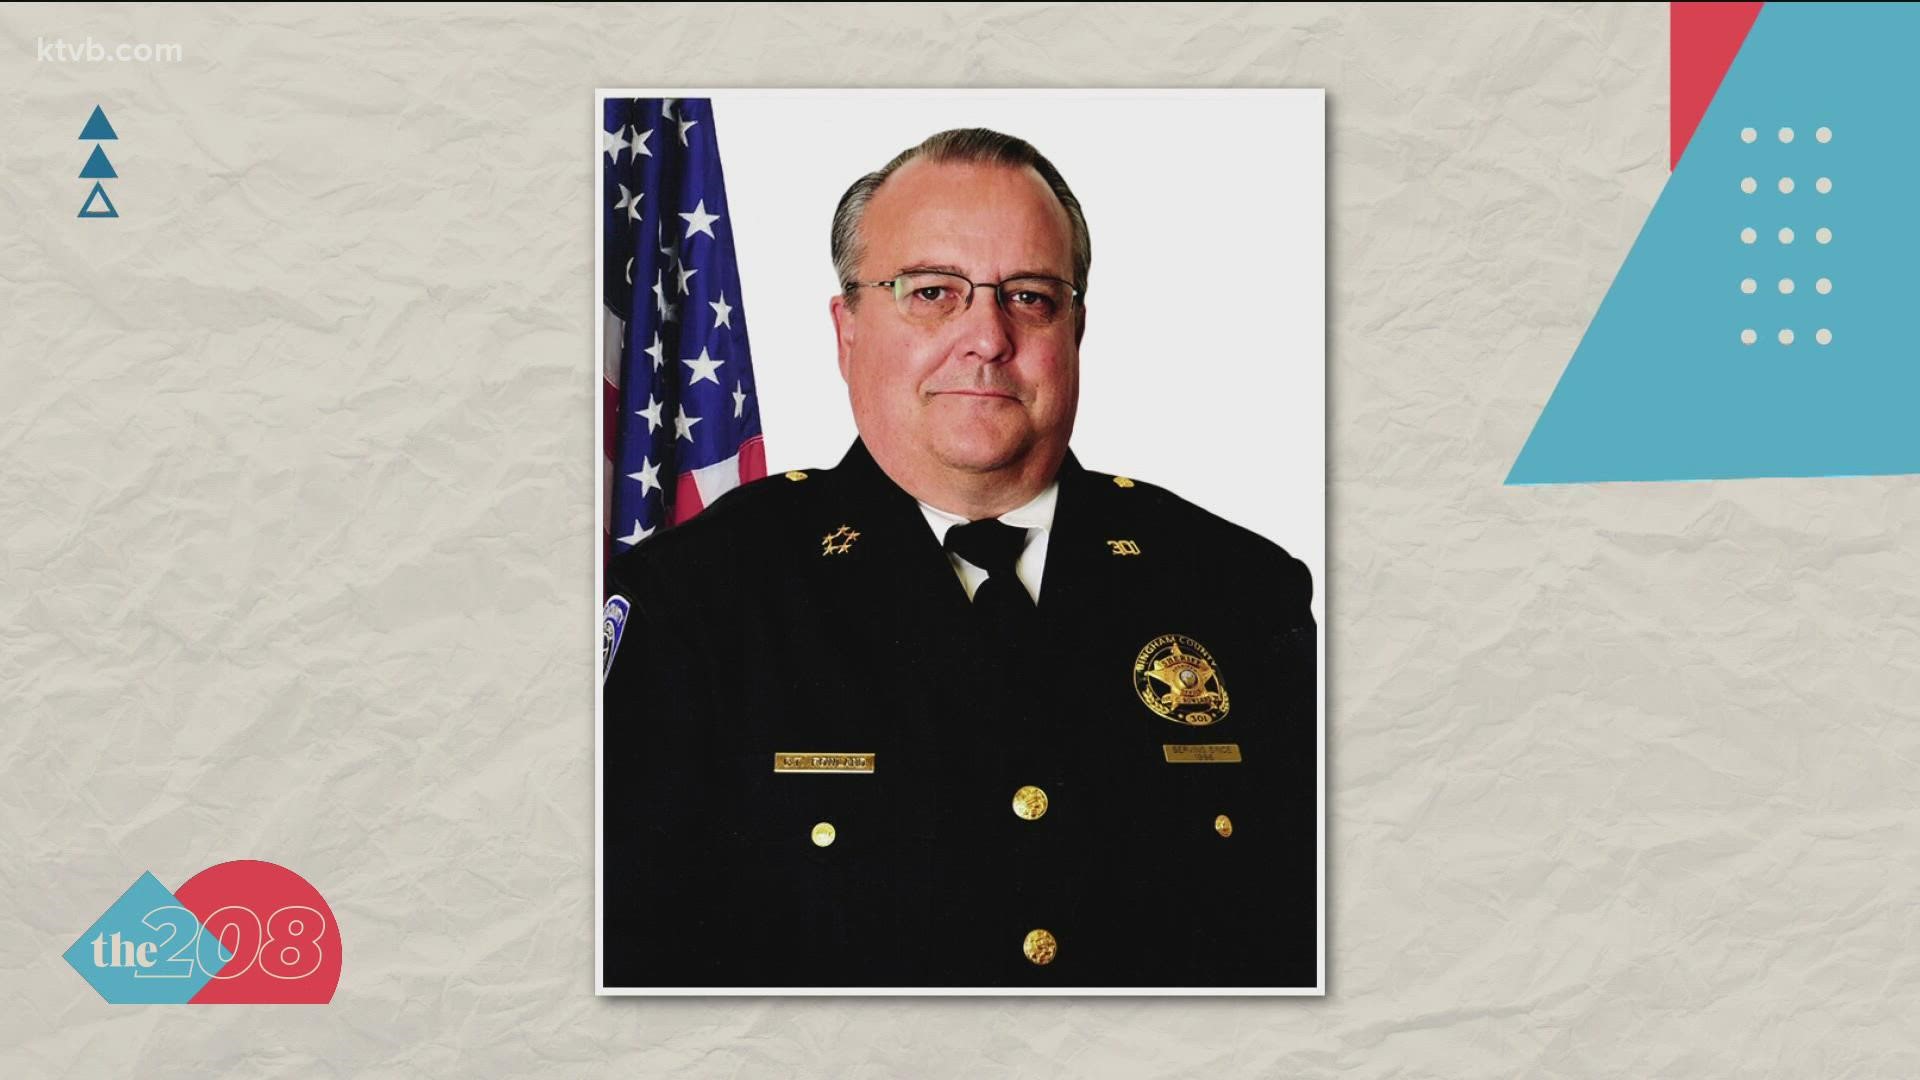 Sheriff Craig Rowland is accused of pulling a gun and threatening a church youth group that was leaving thank-you notes on porches around the sheriff's neighborhood.